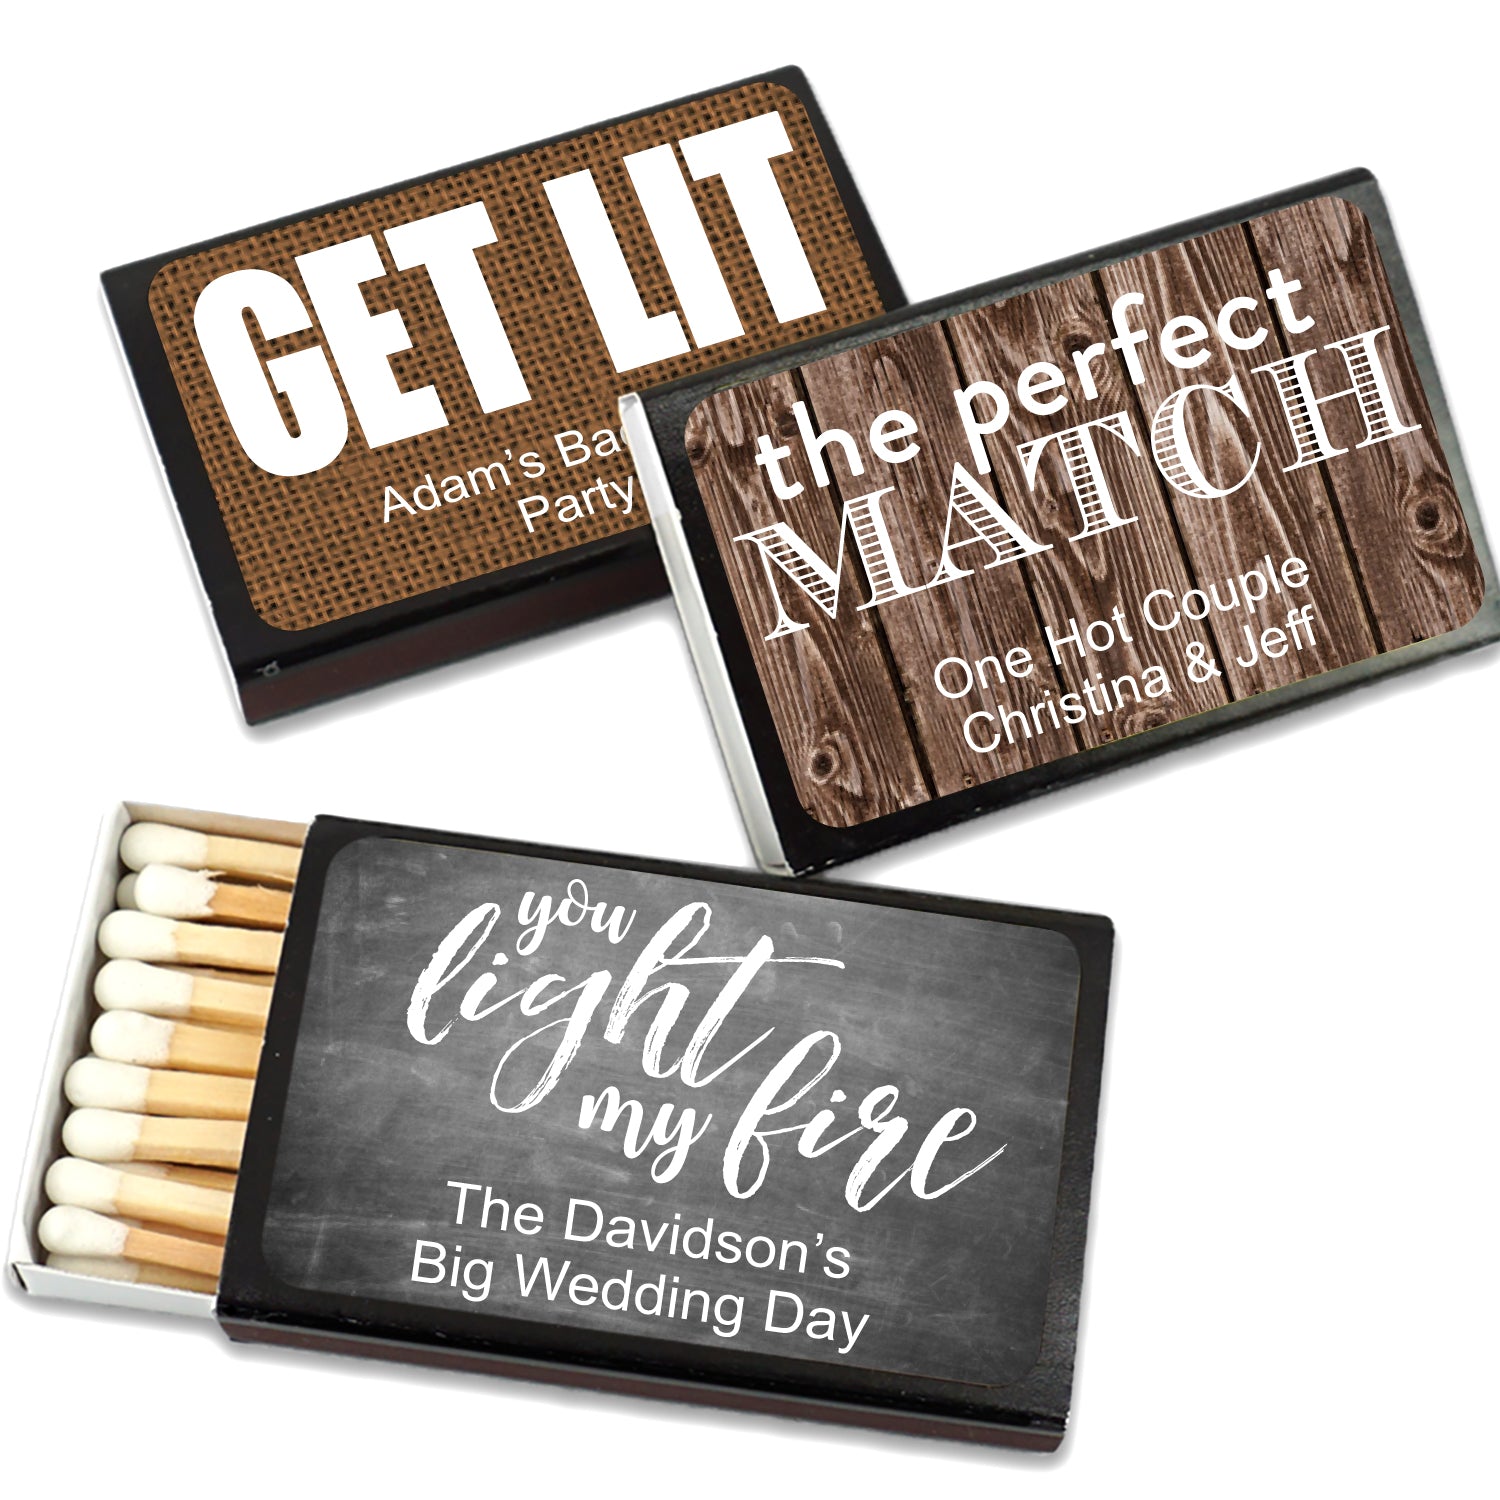 Ducky Days Promotional Match Box Matches - 50 Quantity - Promotional Product/Bulk with Your Logo/Customized (Black Box)